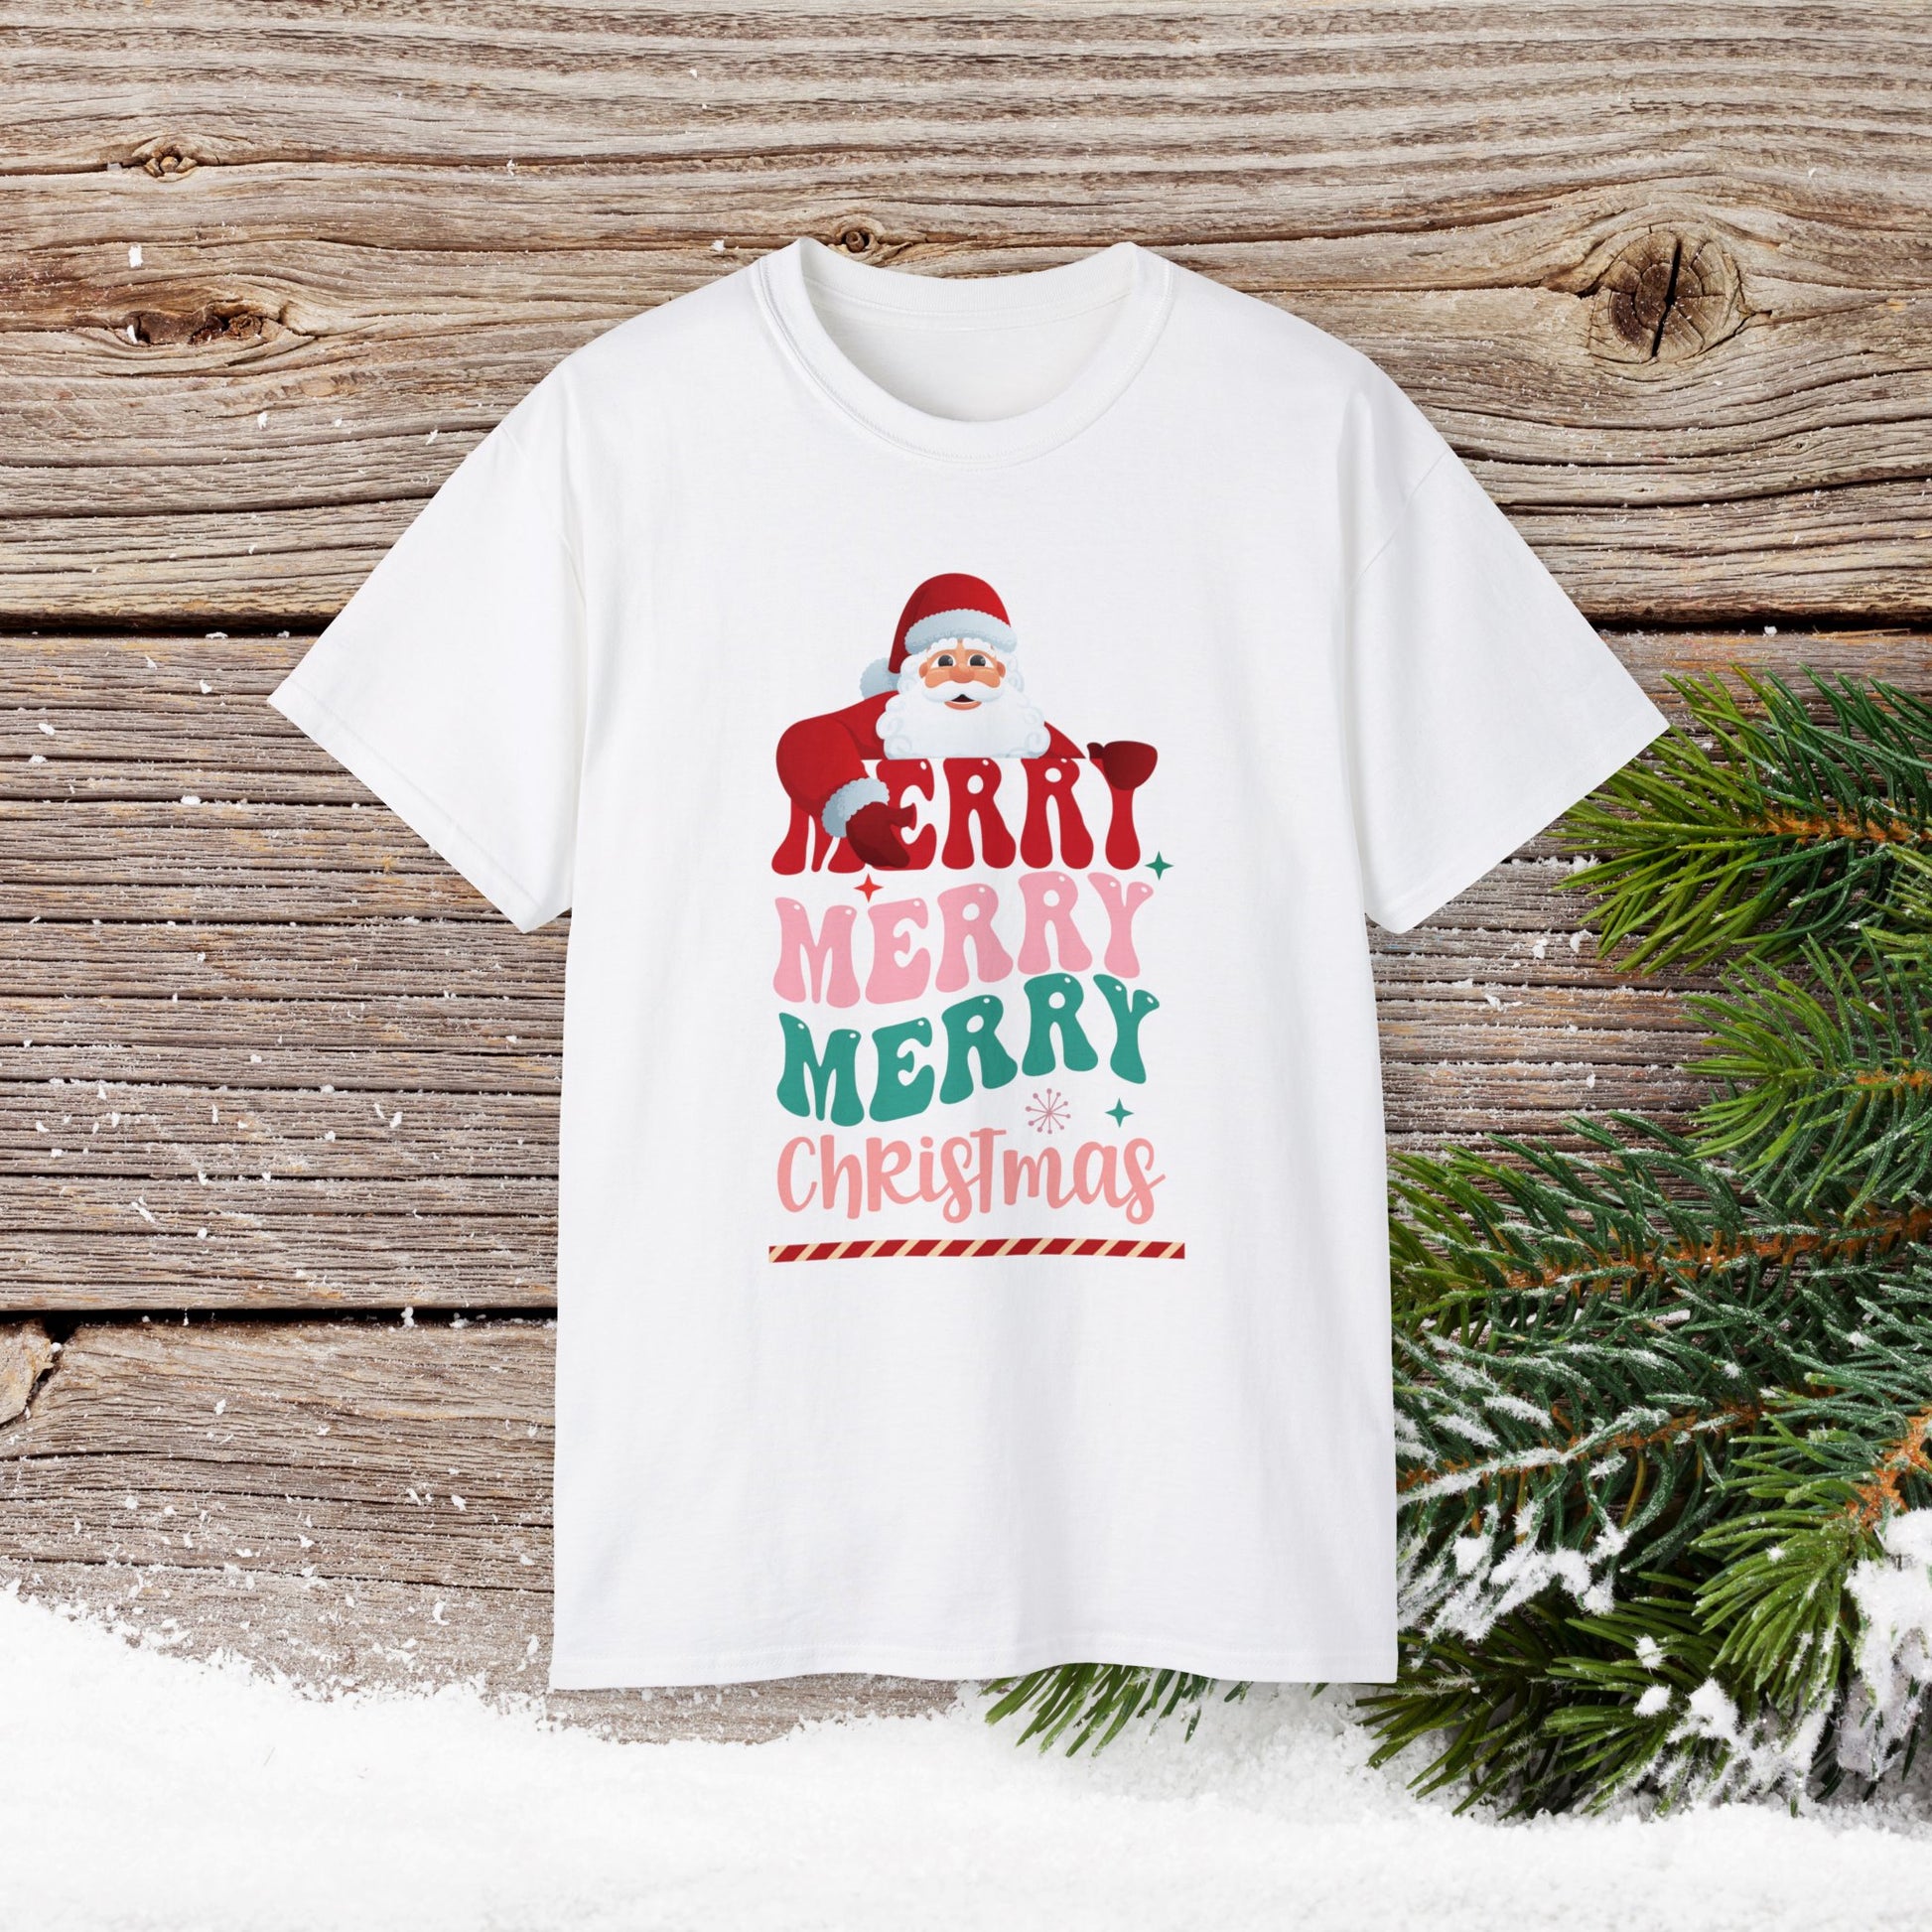 Christmas T-Shirt - Merry Merry Merry Christmas - Cute Christmas Shirts - Youth and Adult Christmas TShirts T-Shirts Graphic Avenue White Adult Small 